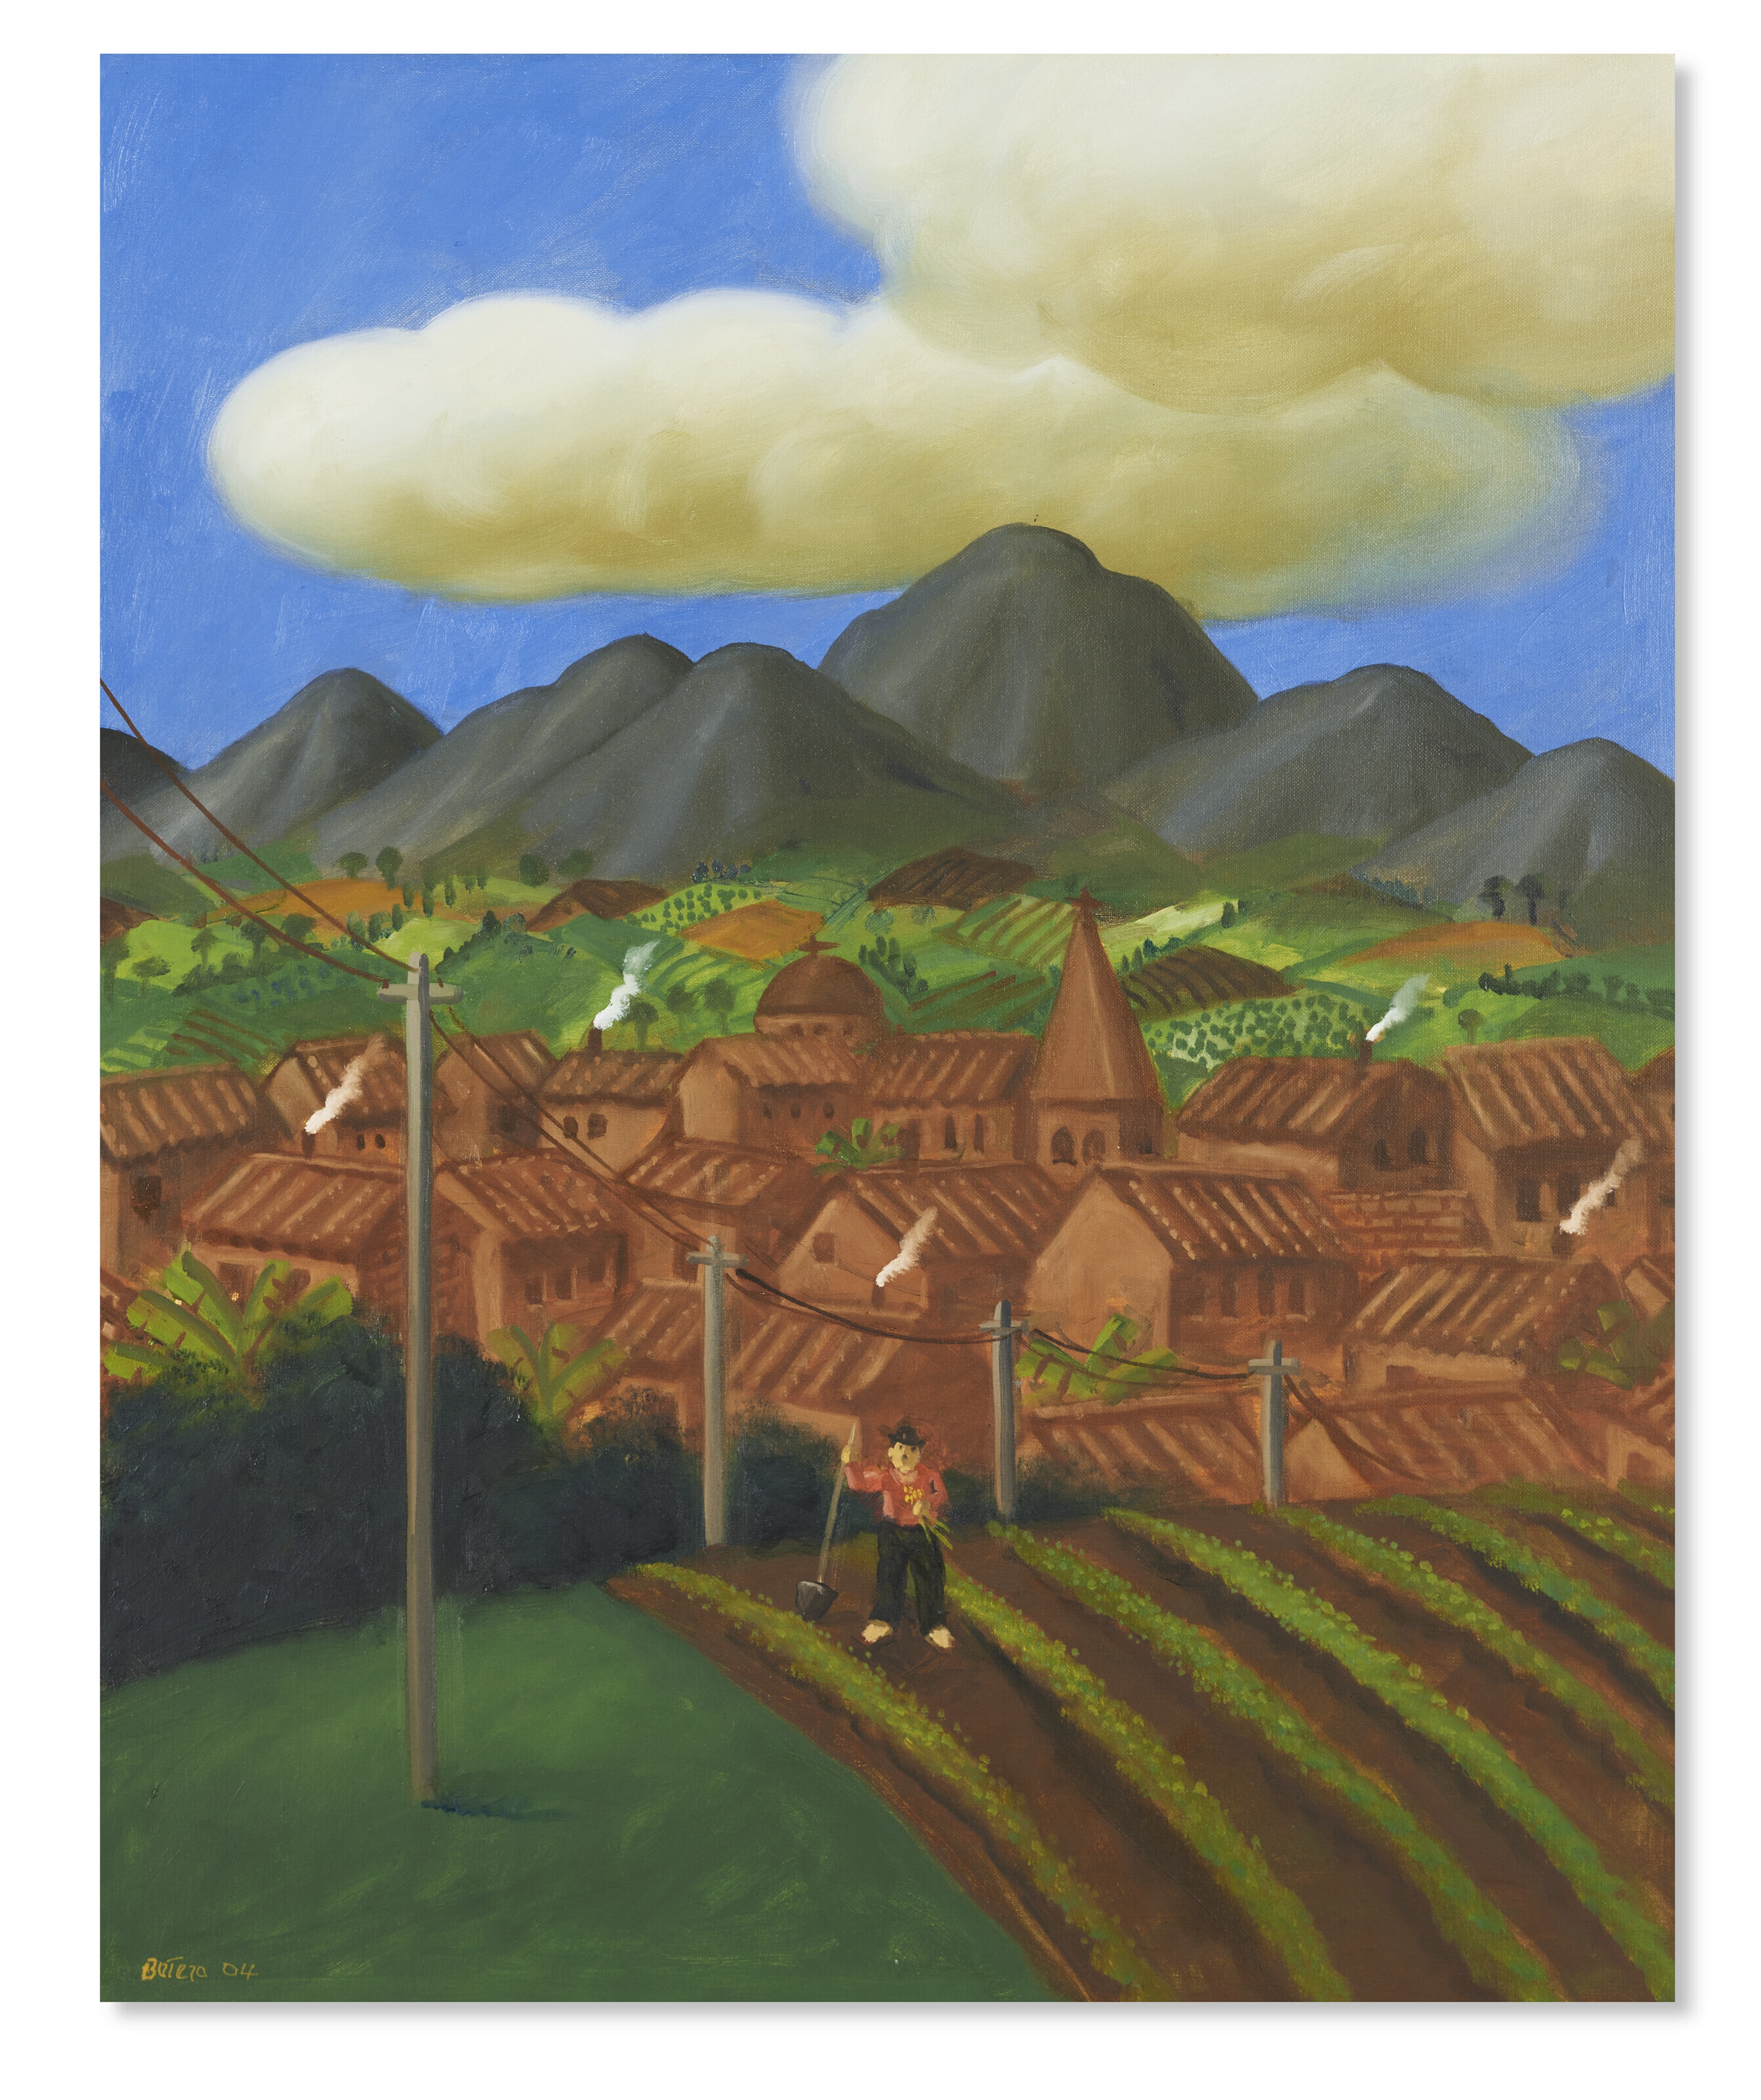 Artwork by Fernando Botero, Paisaje, Made of oil on canvas